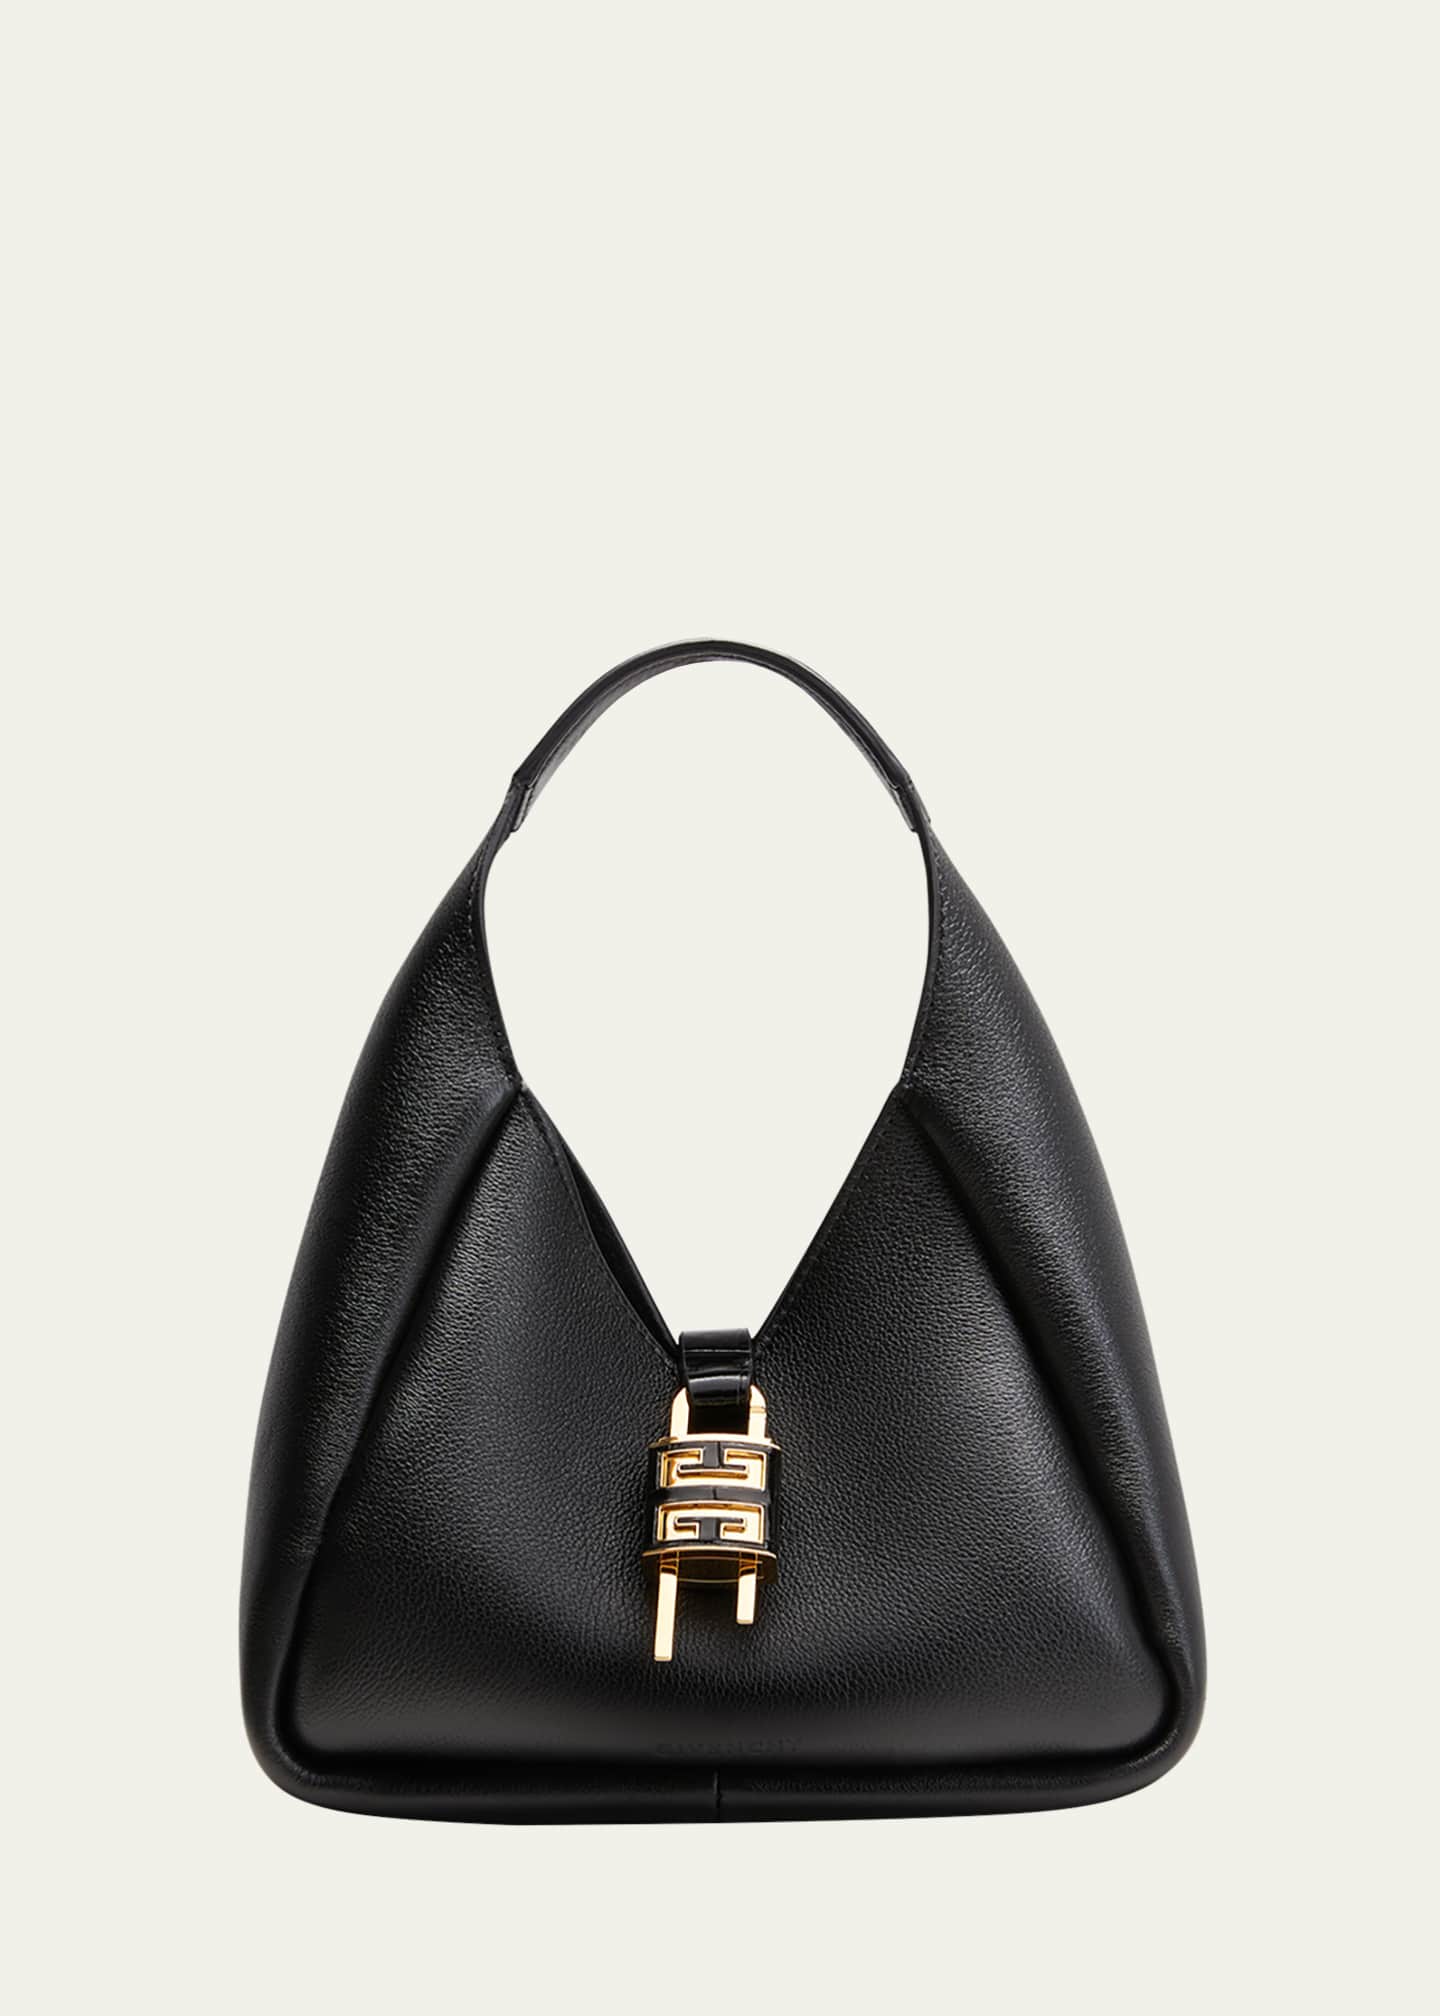 Givenchy Mini G Hobo Bag in Leather